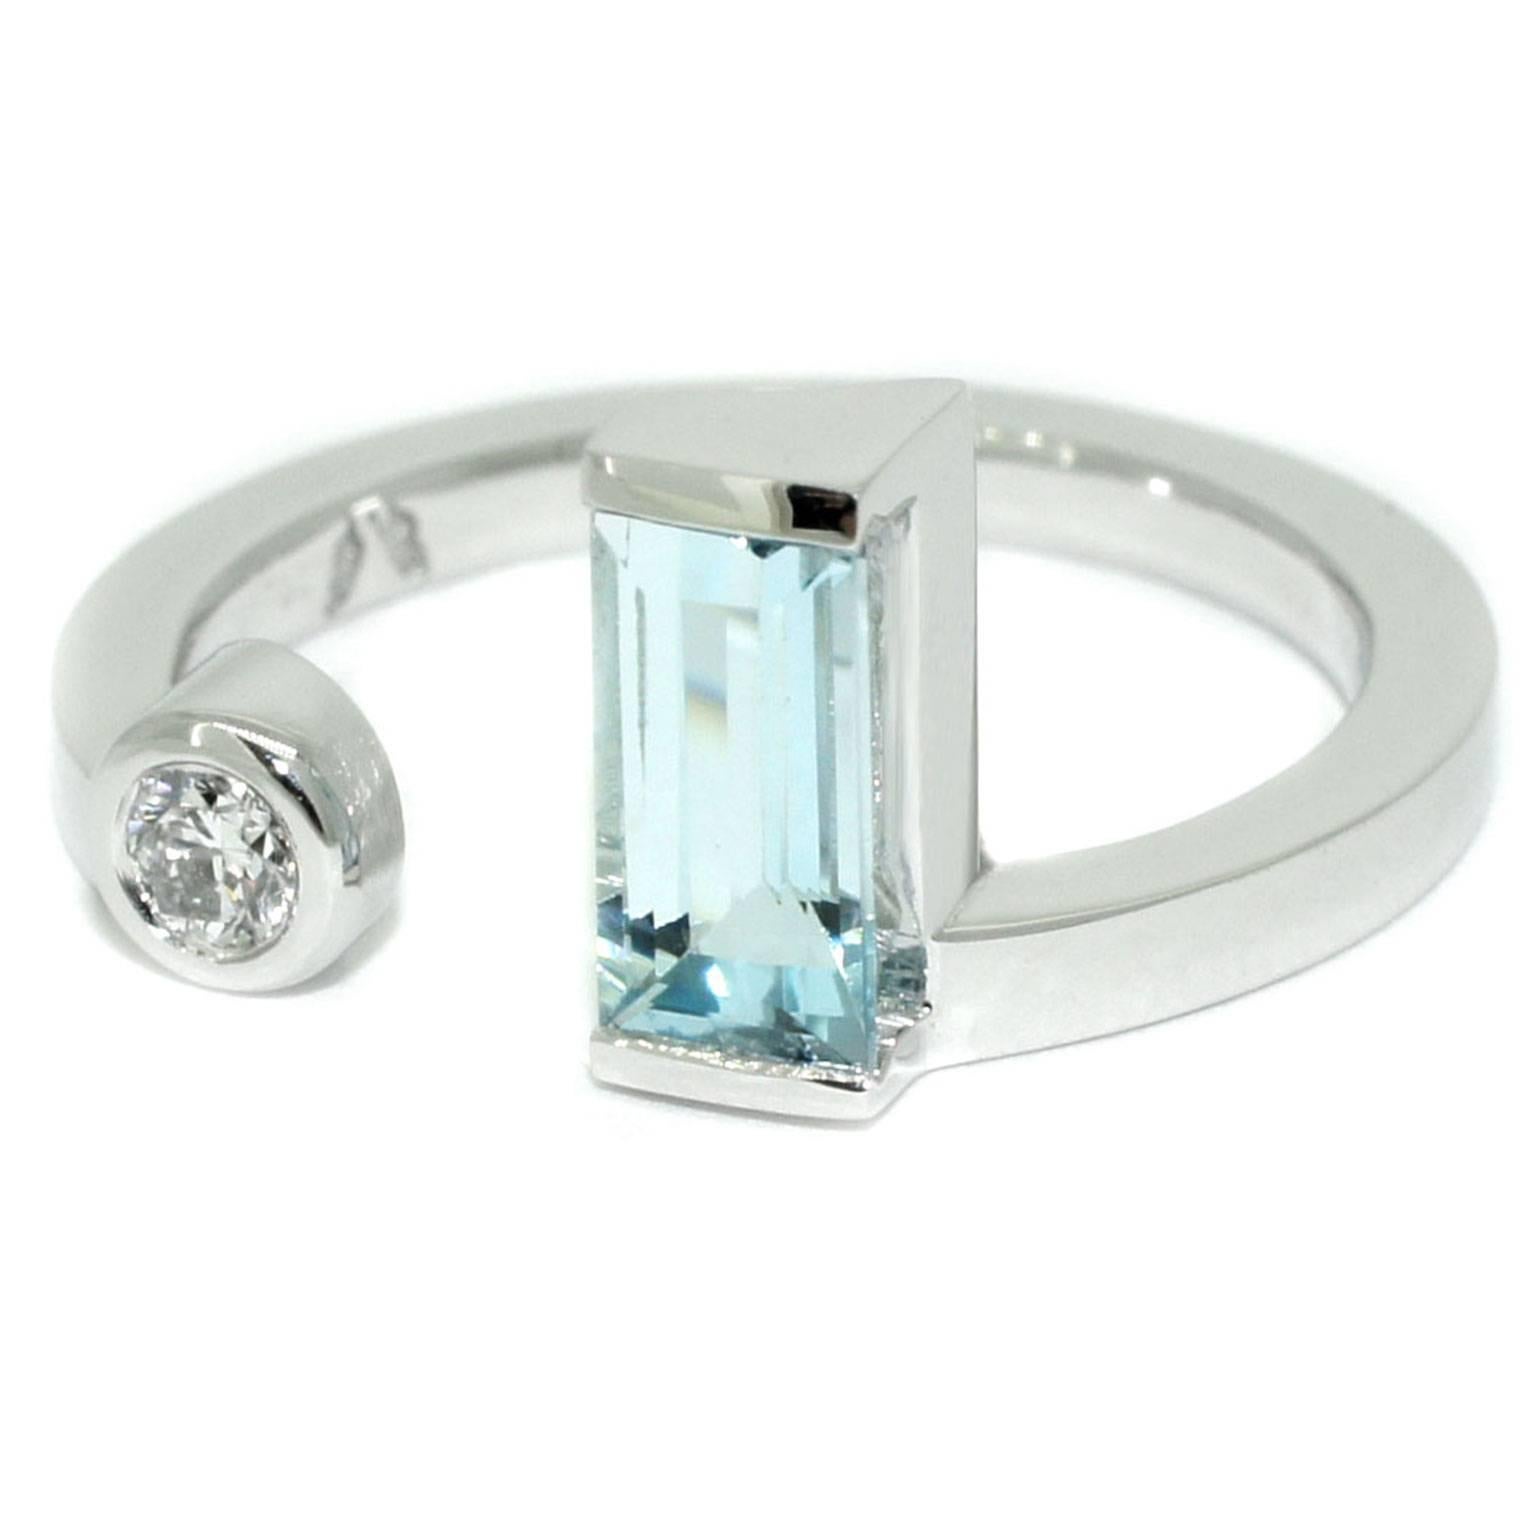 The design of this modern but timeless ring was inspired by the skyline and architecture of Manhattan, and its strong Art Deco influence. It features a baguette cut aquamarine and a round brilliant cut diamond, set in 18k white gold. This stylish